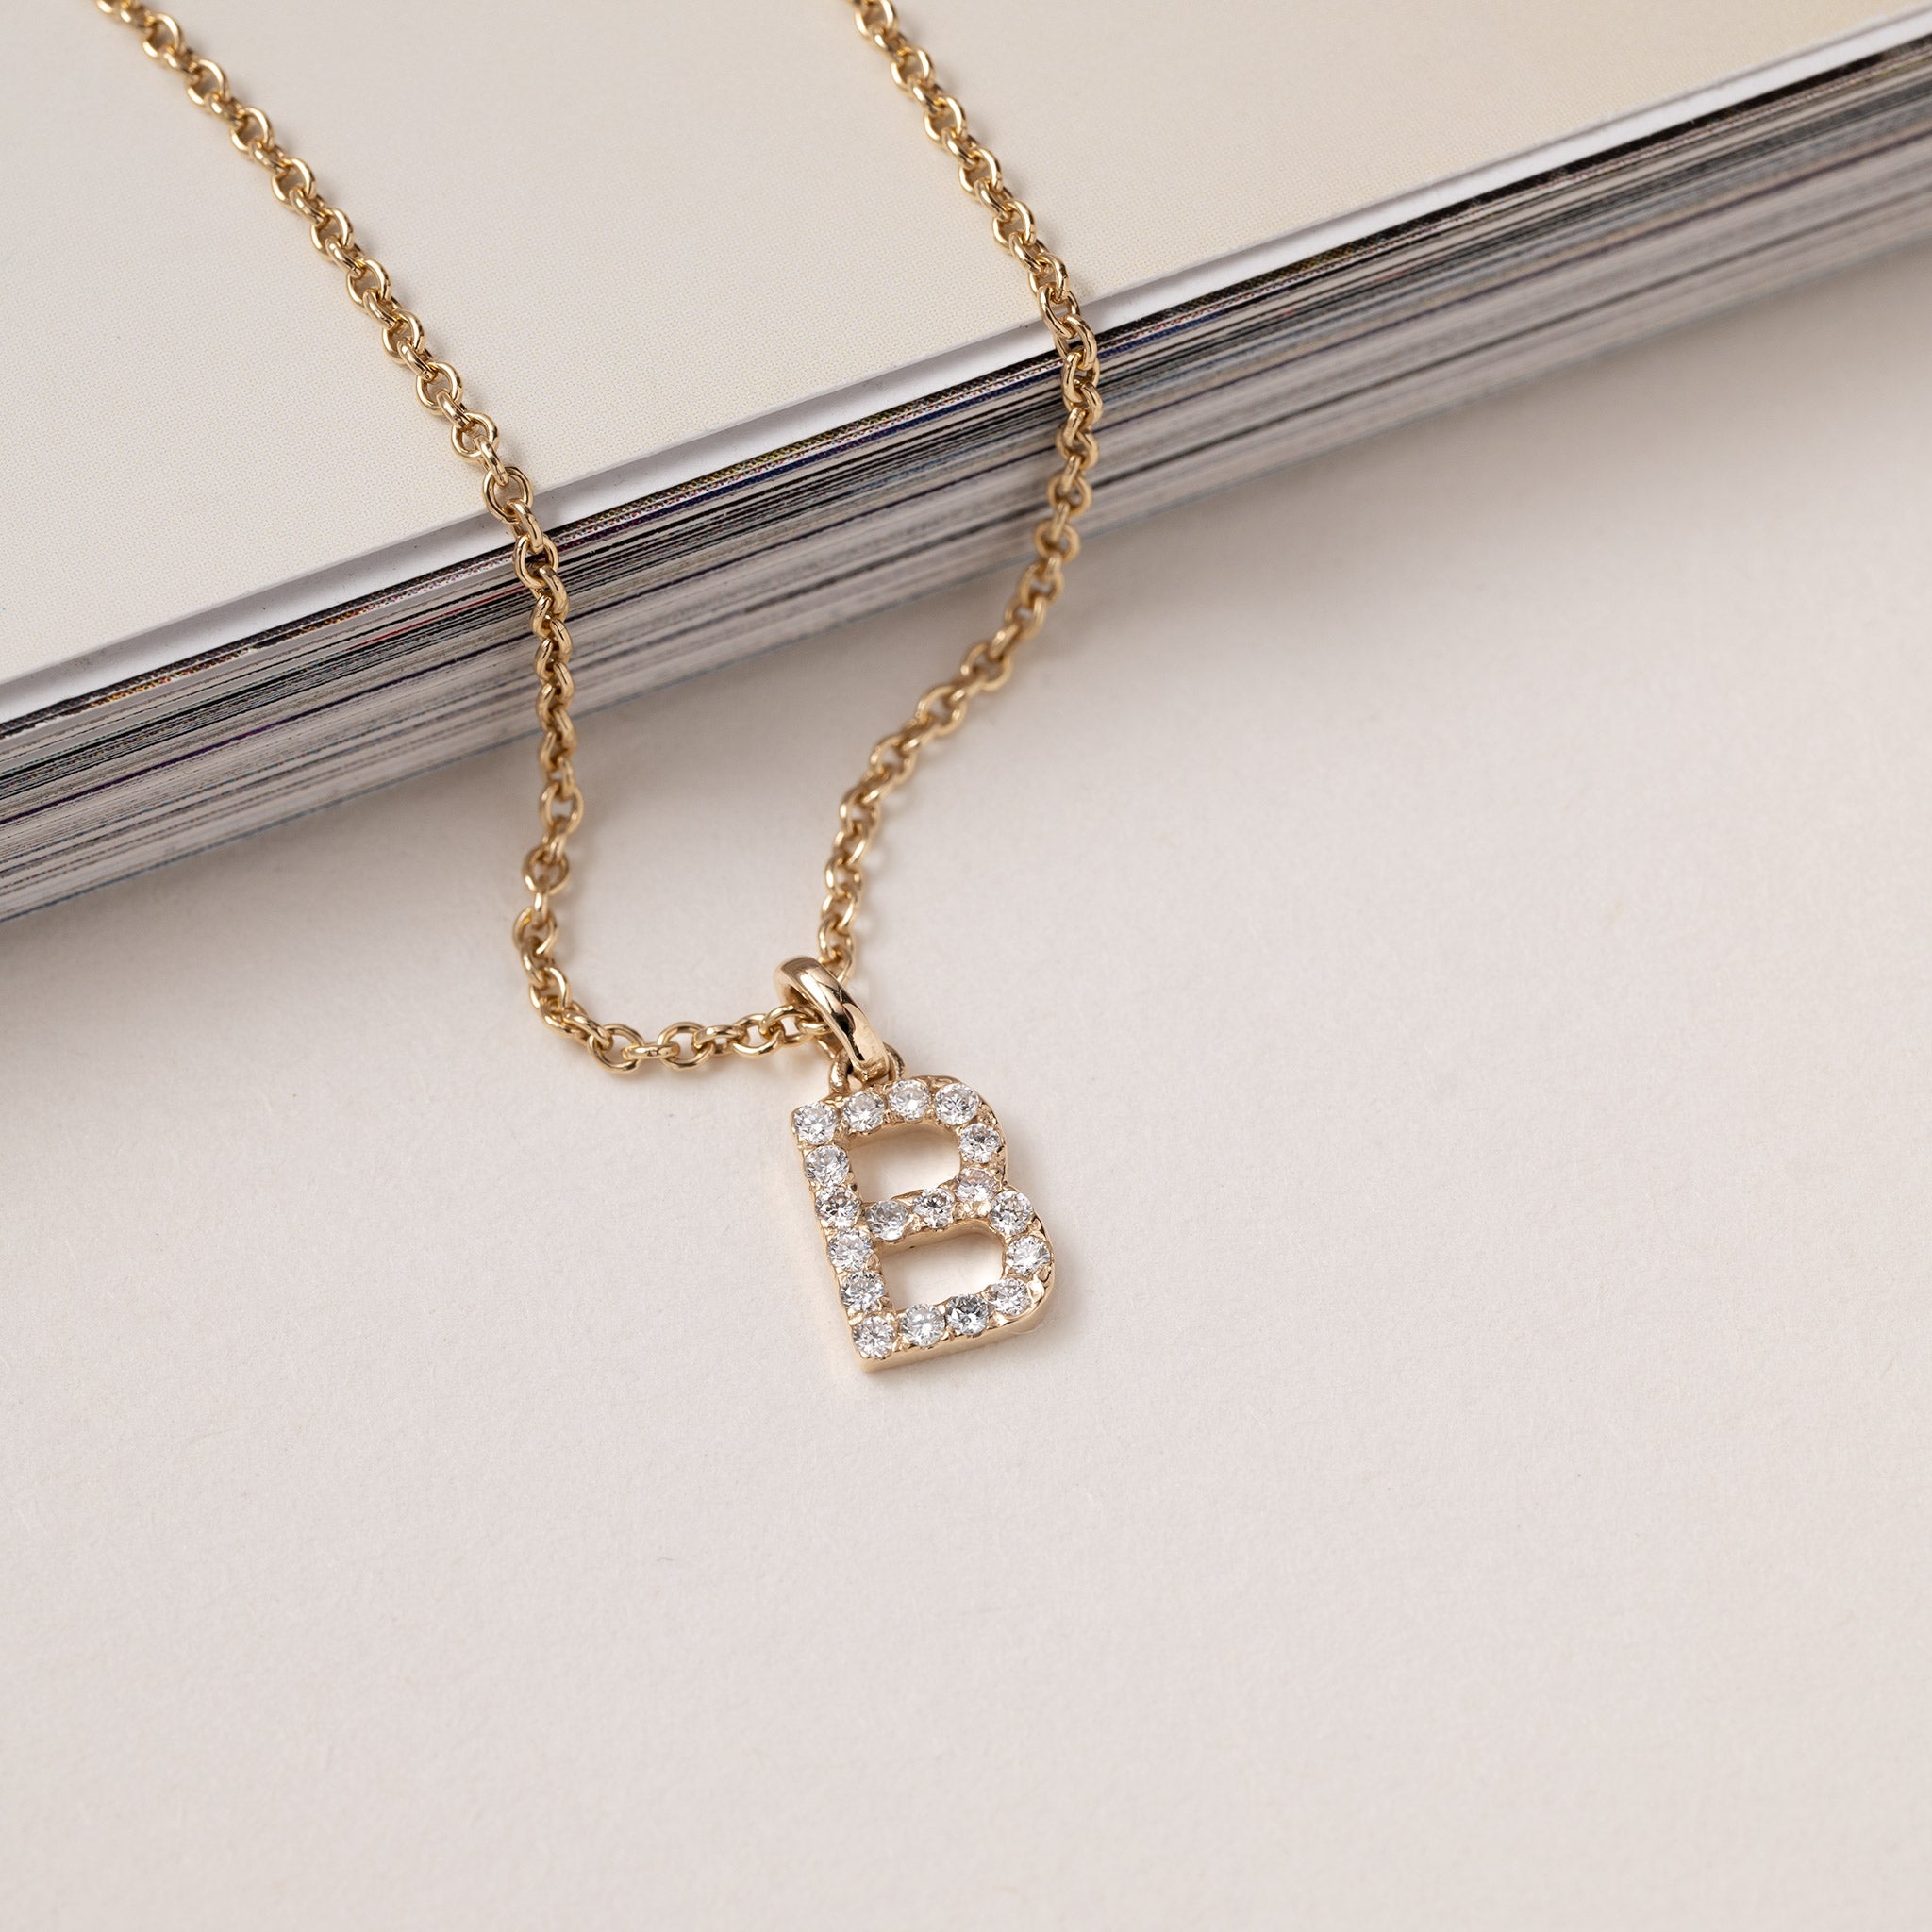 Diamond Letter Charms with Initials in 14-Karat gold